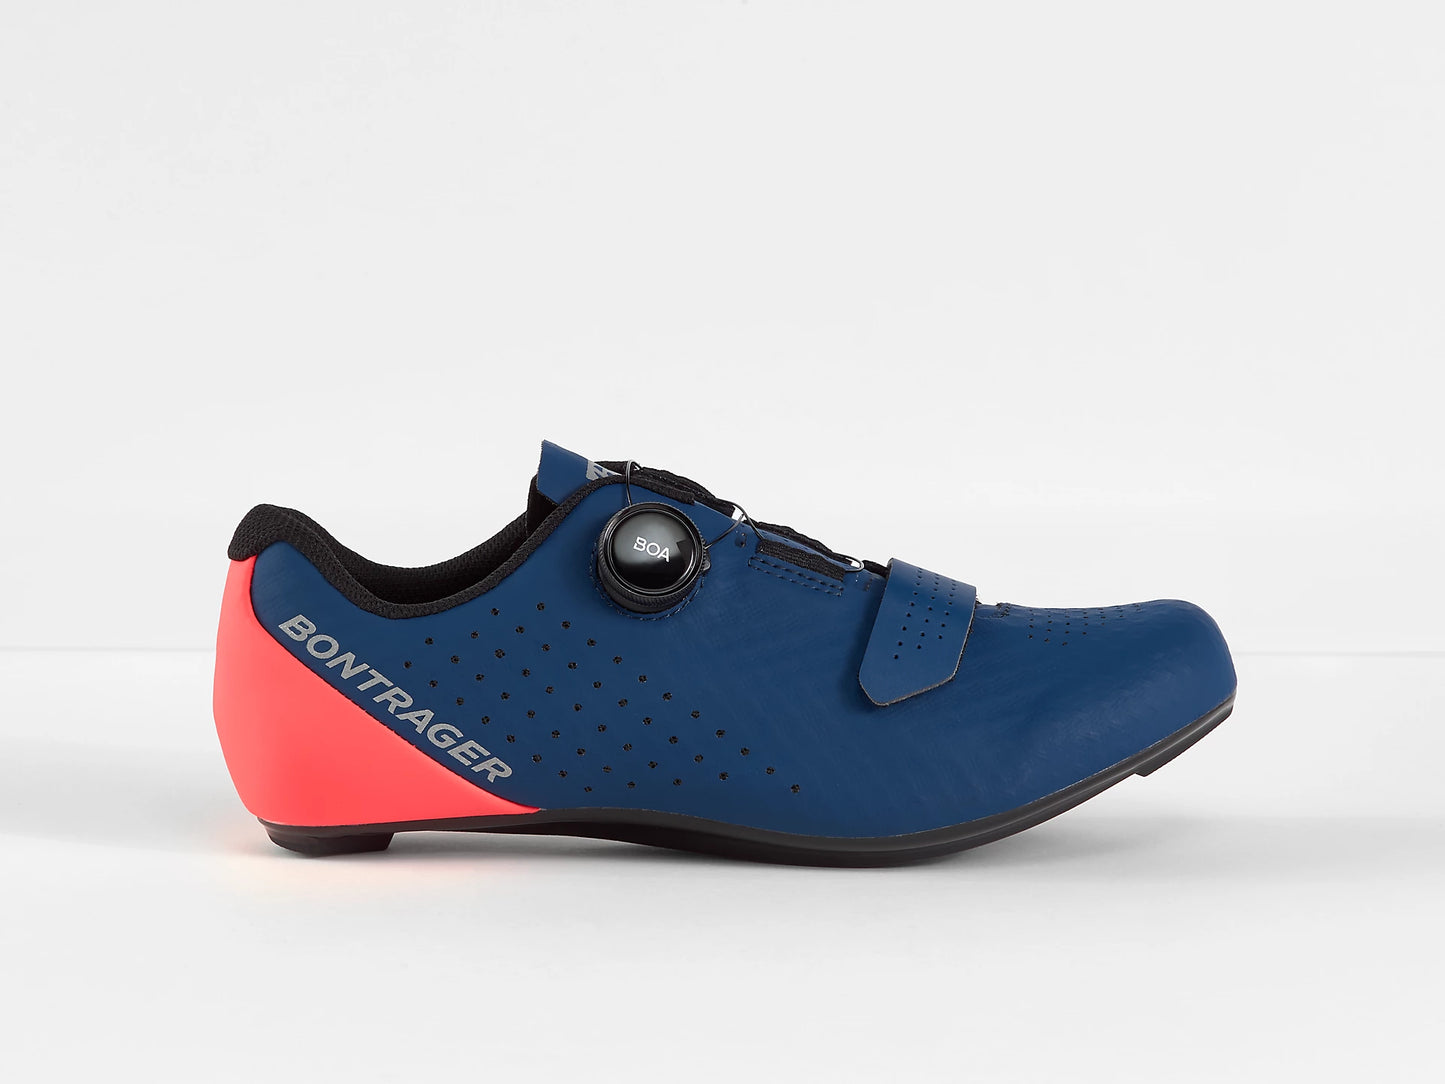 BONTRAGER Chaussures Route Circuit